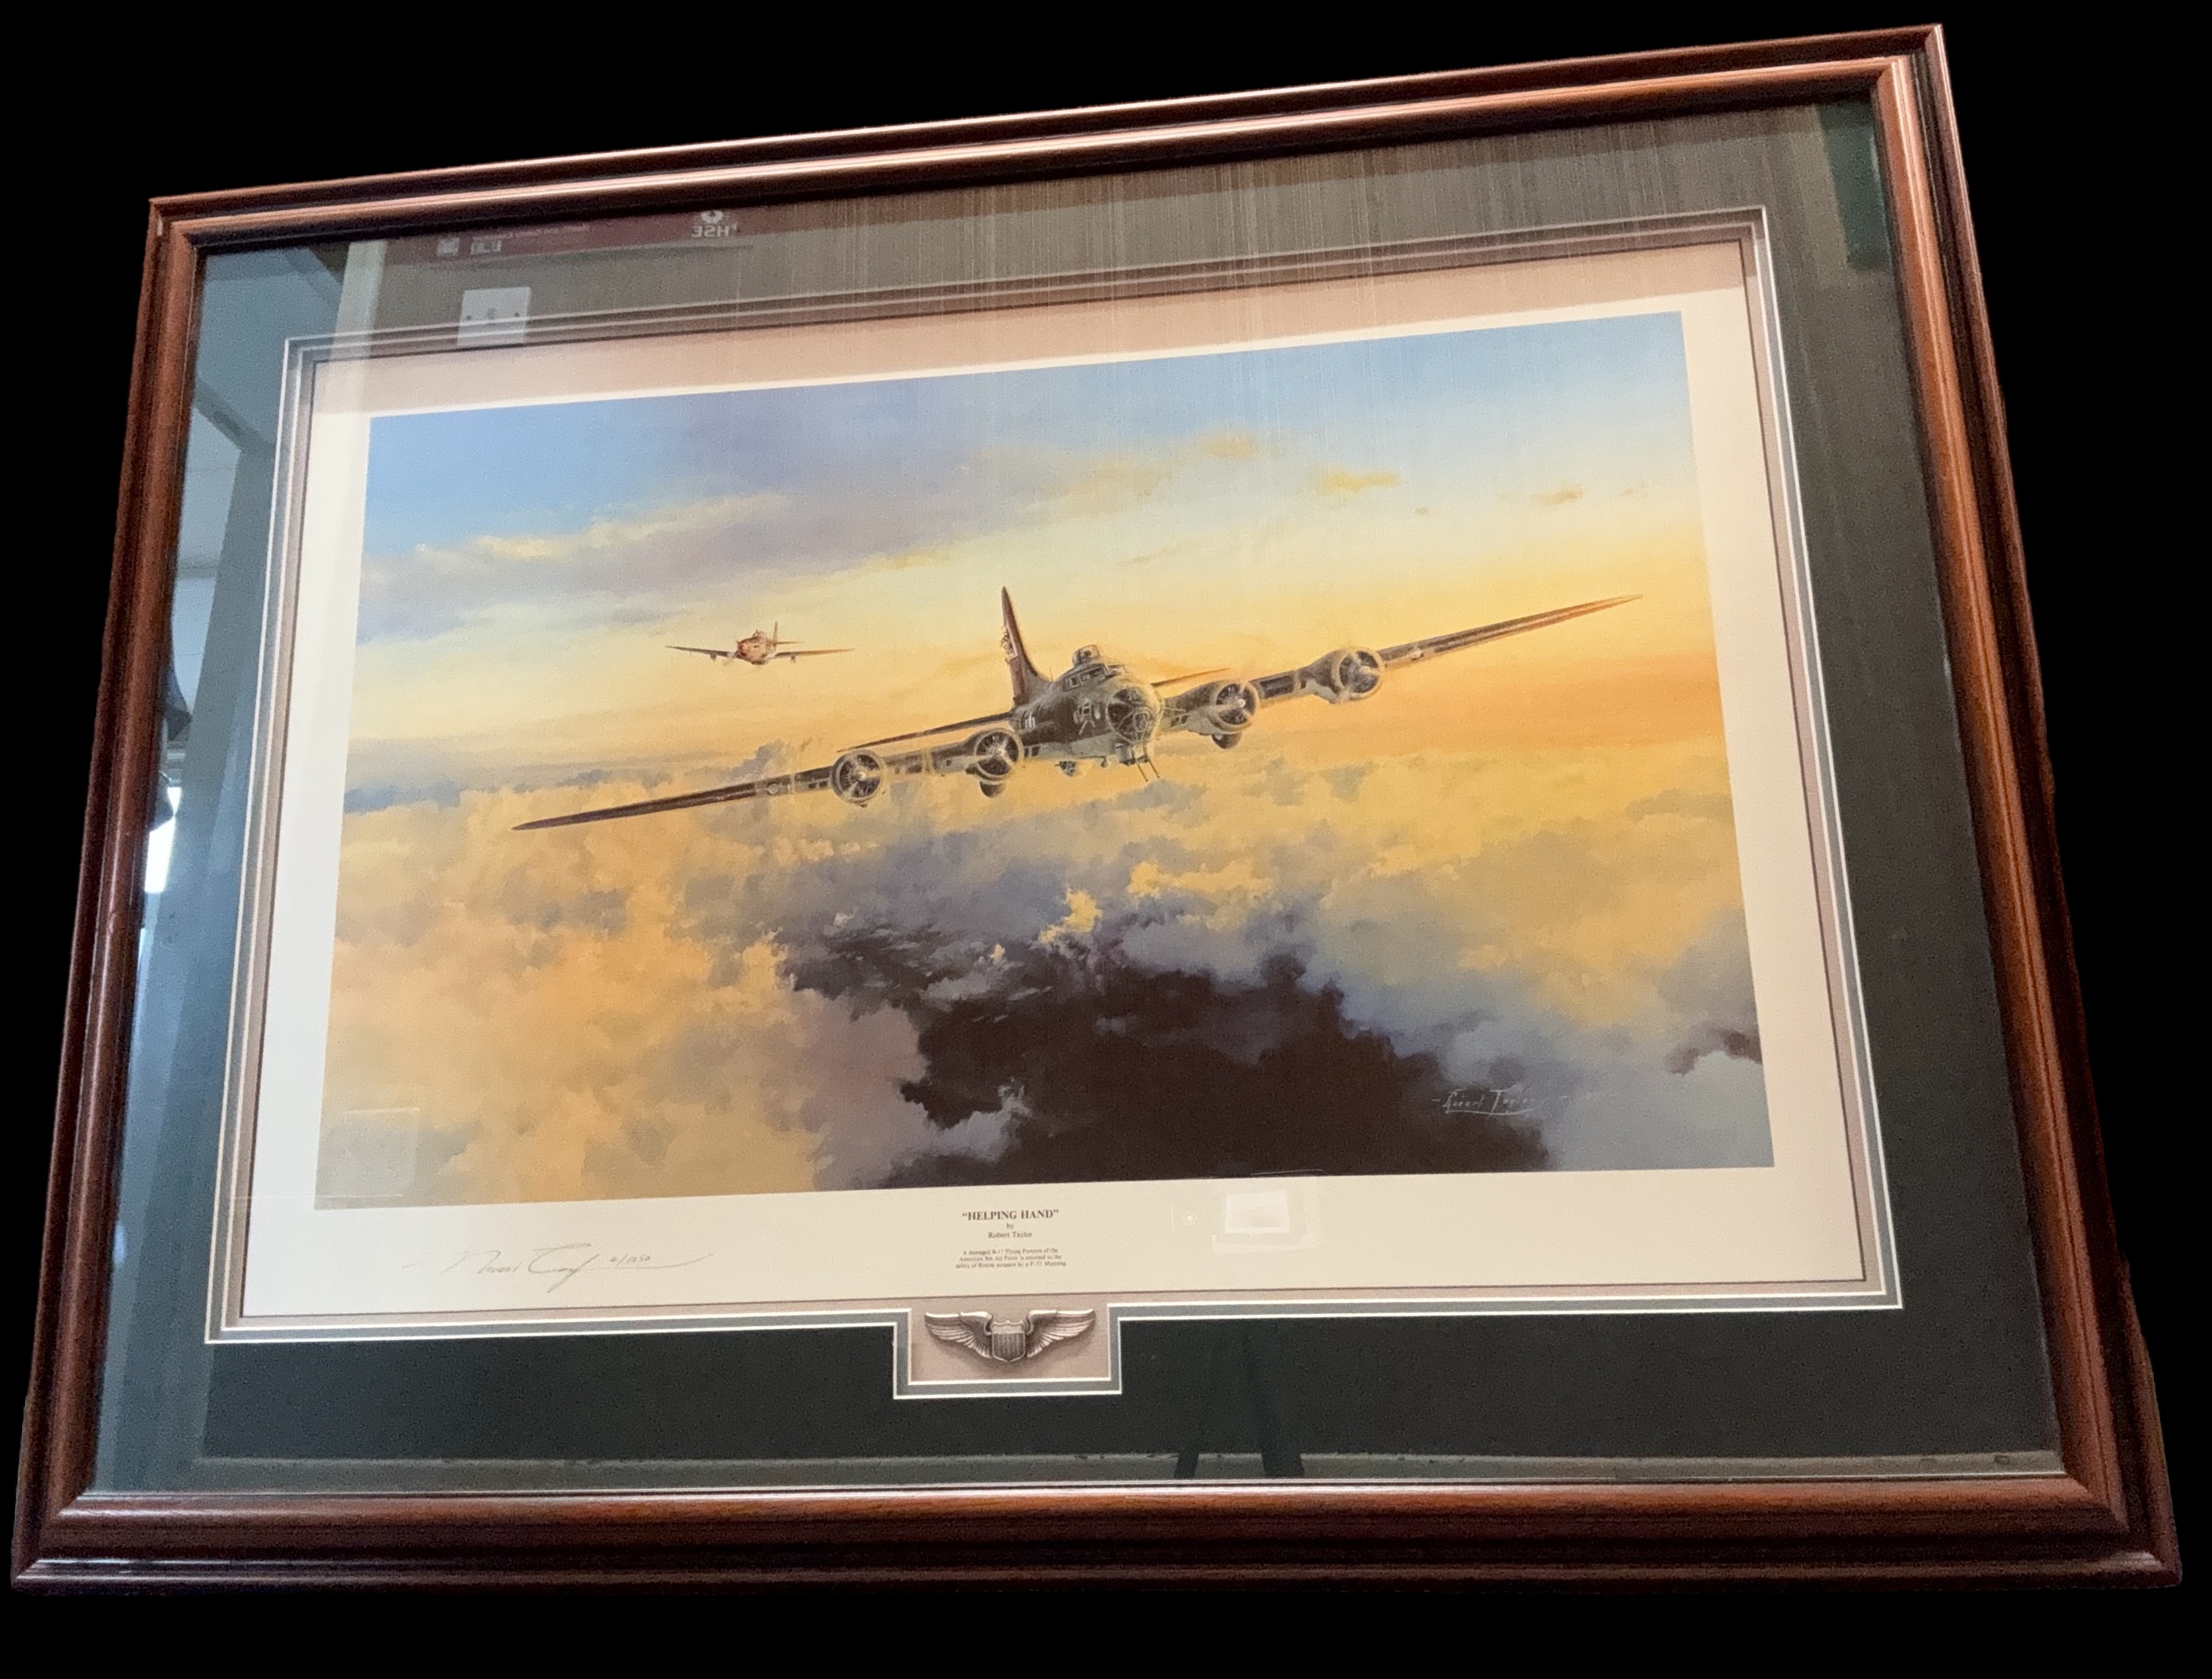 Helping Hand WWII 37x28 inch framed and mounted print limited edition 4/1250 signed in pencil by the